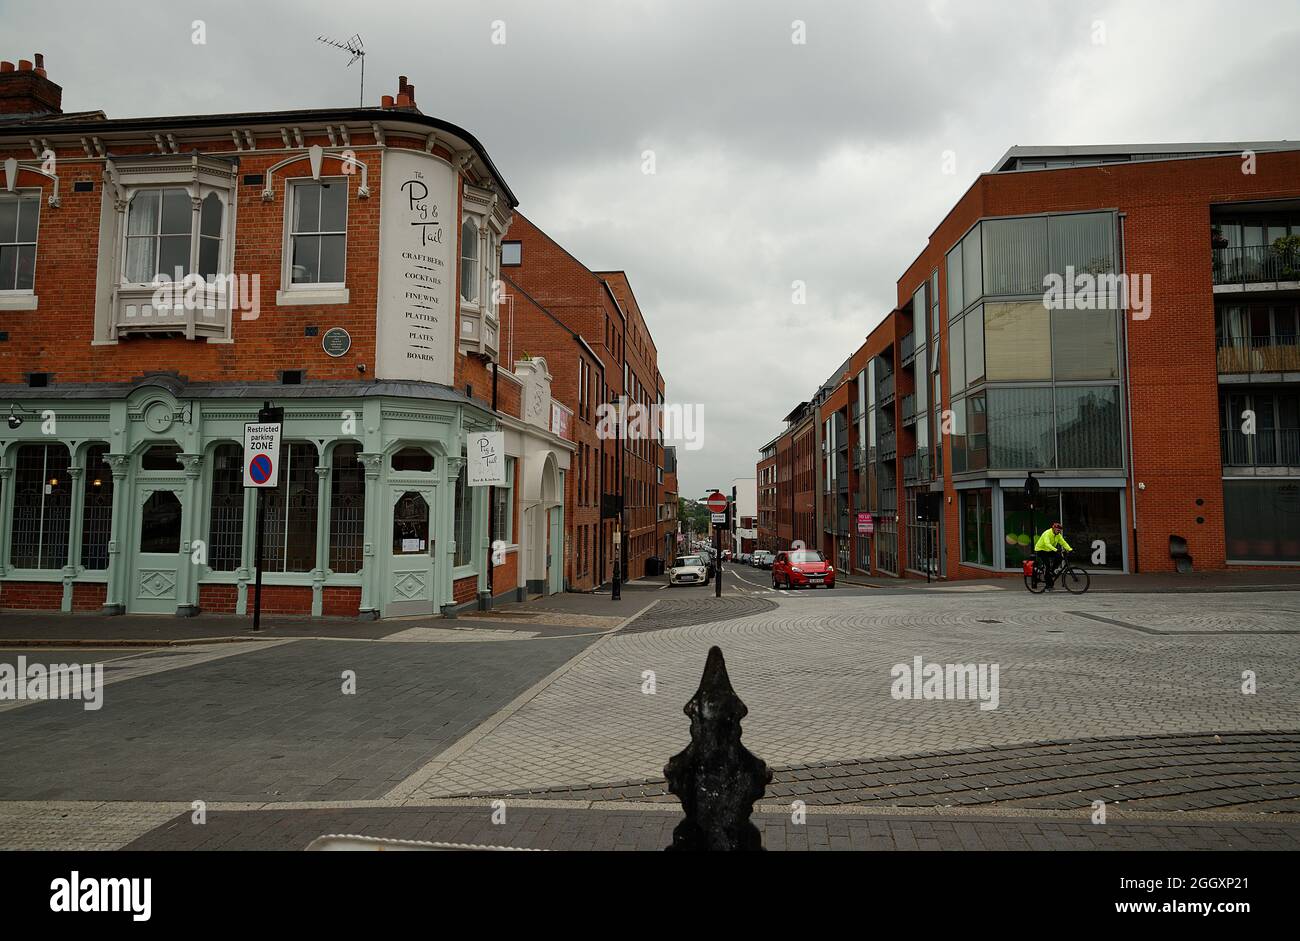 The Jewellery quarter in Birmingham, England. Buildings in central Birmingham that in the past and the present, house jewellery companies. Stock Photo